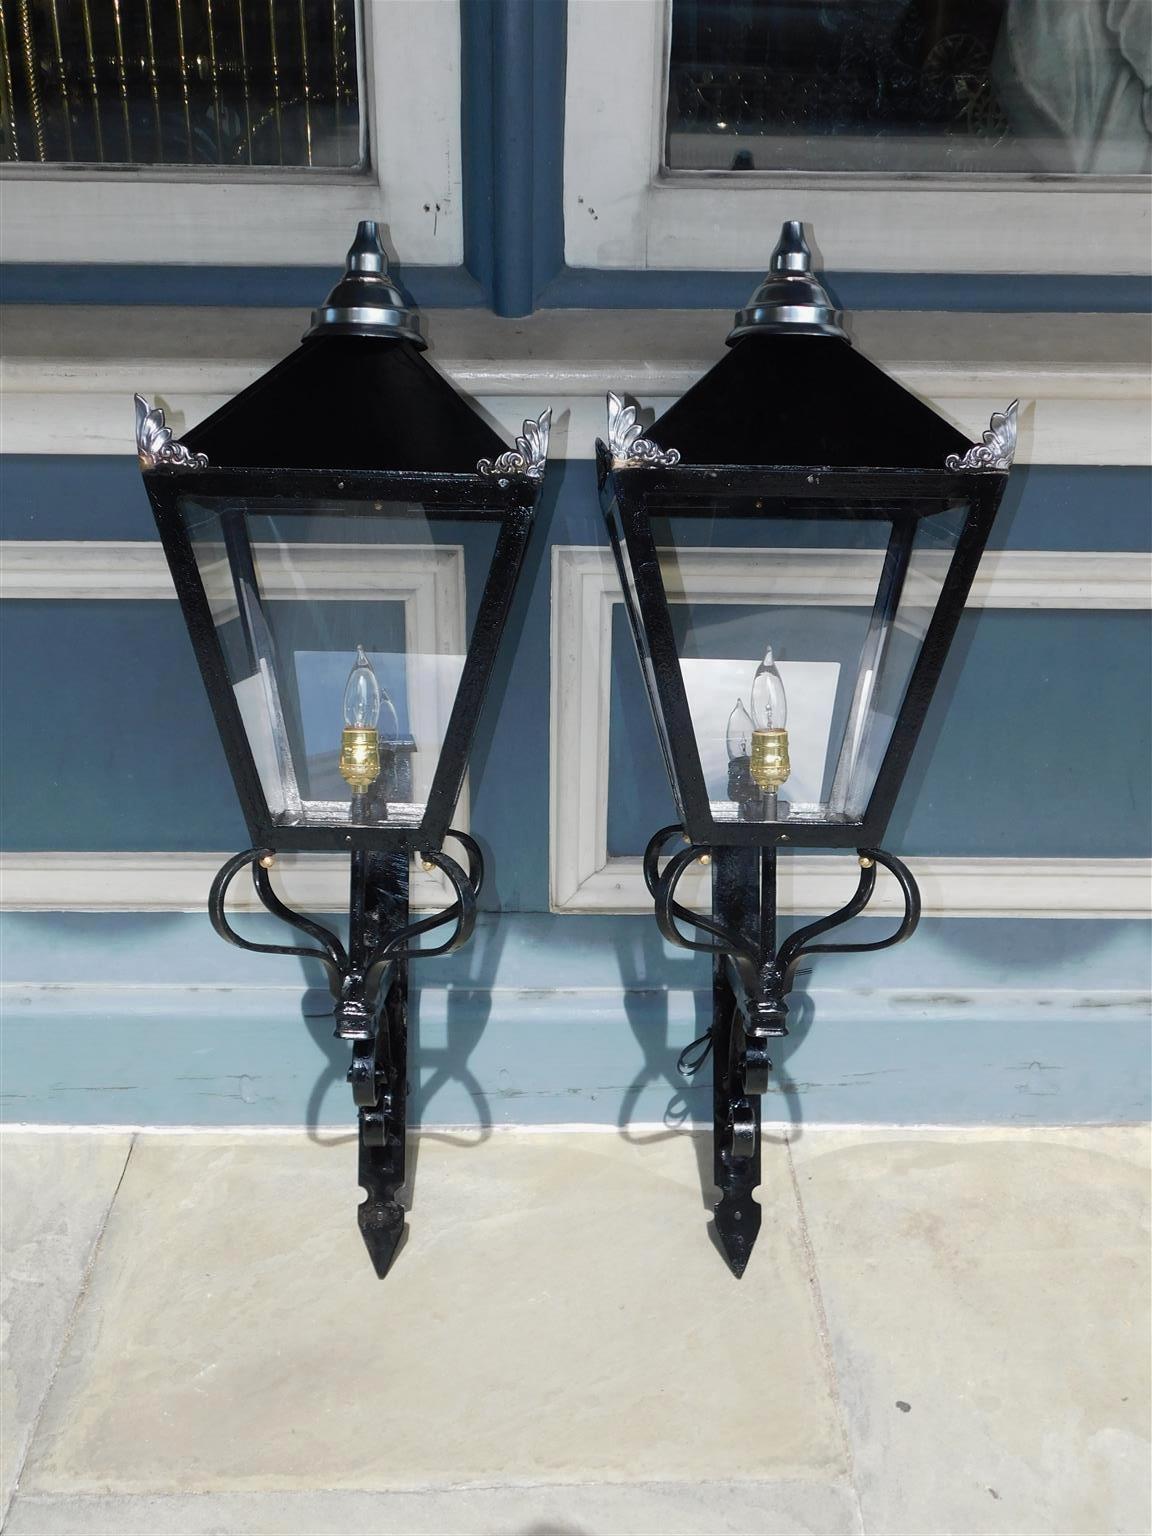 Cast Pair of American Wrought Iron and Spelter Finial Mounted Wall Lanterns, C. 1850 For Sale